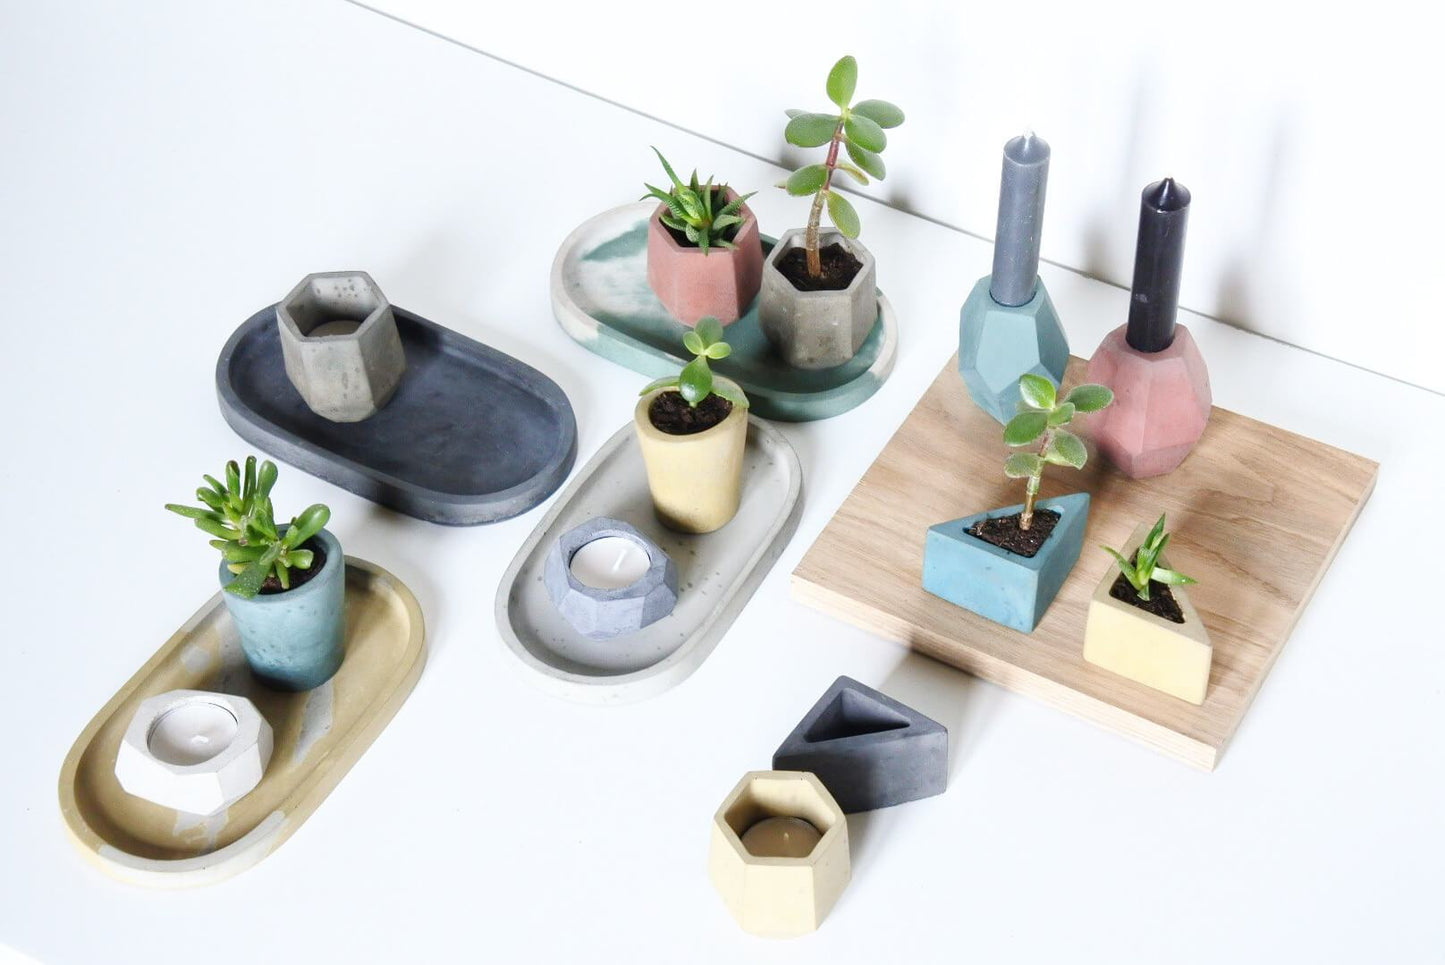 Fern Tray Concrete Shapes Dish - Oval